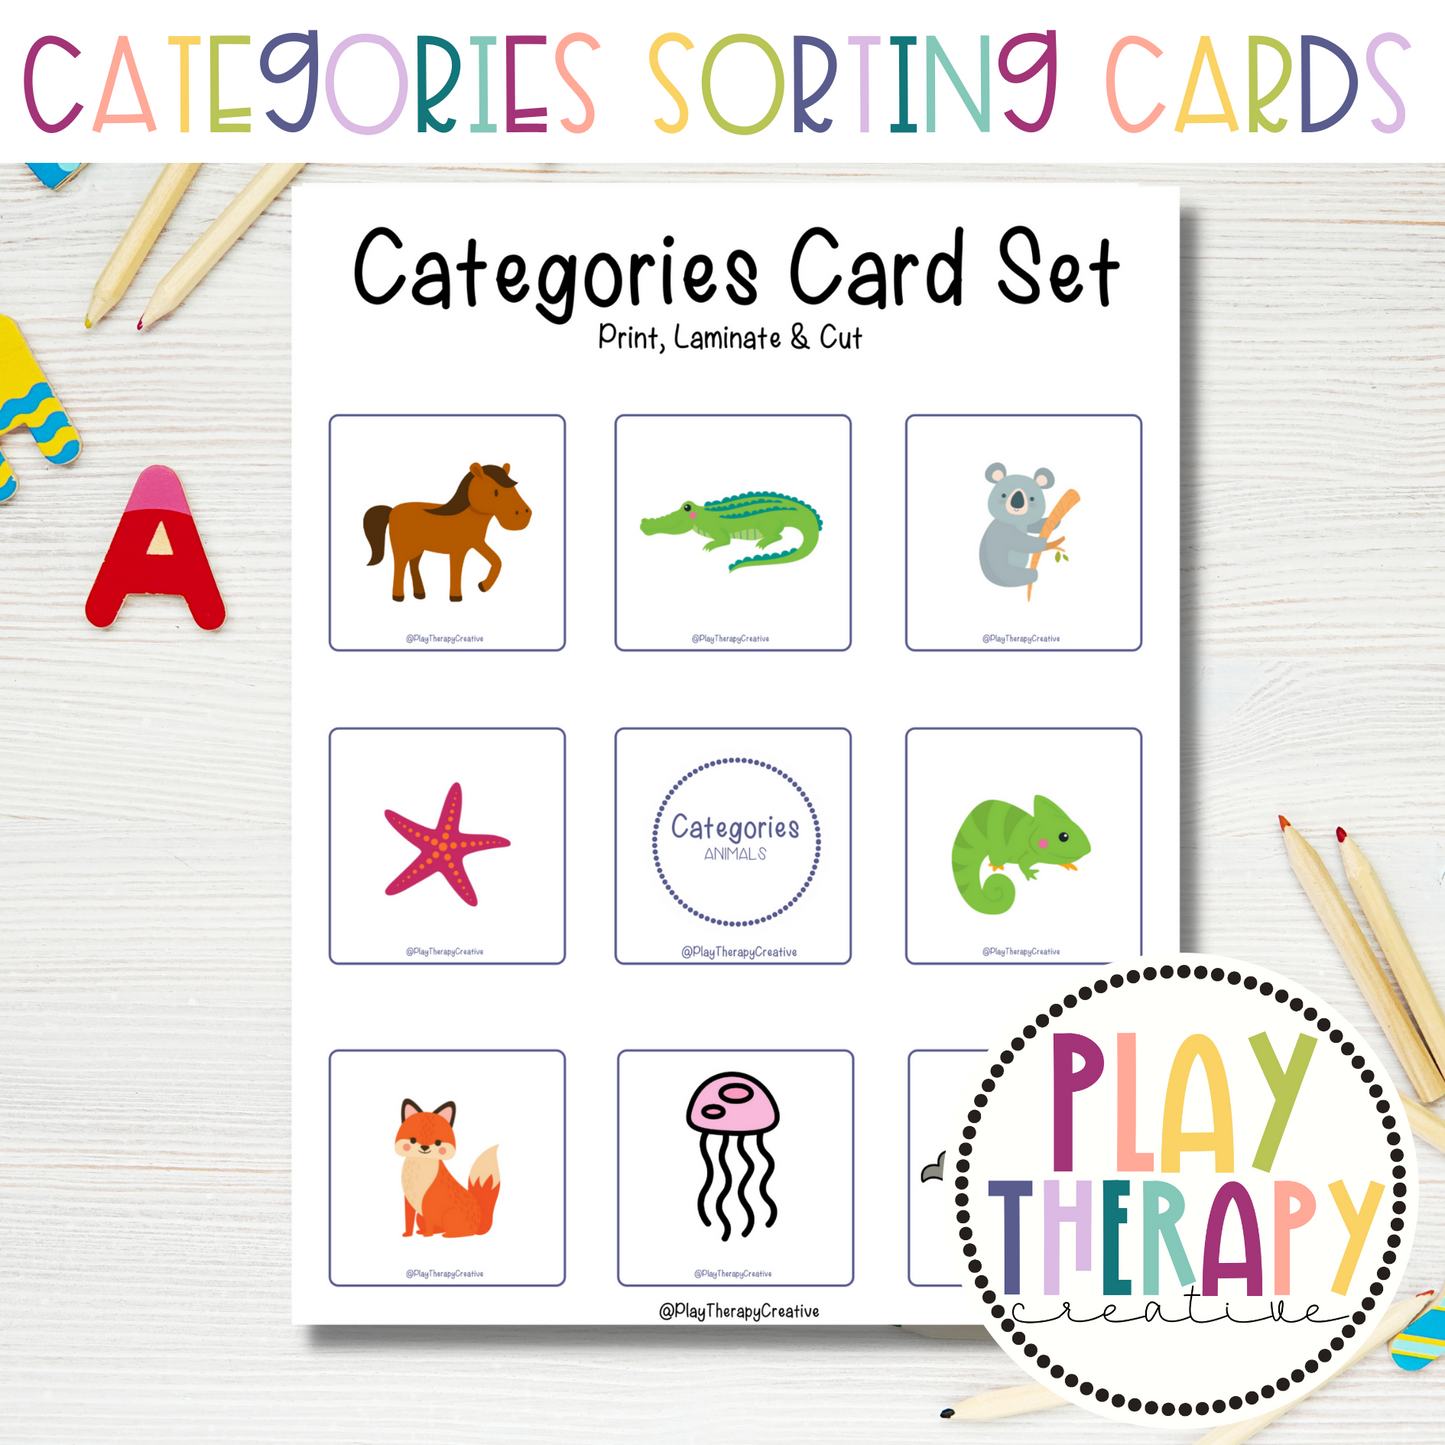 Categories Card Sets for Speech & Language Therapy